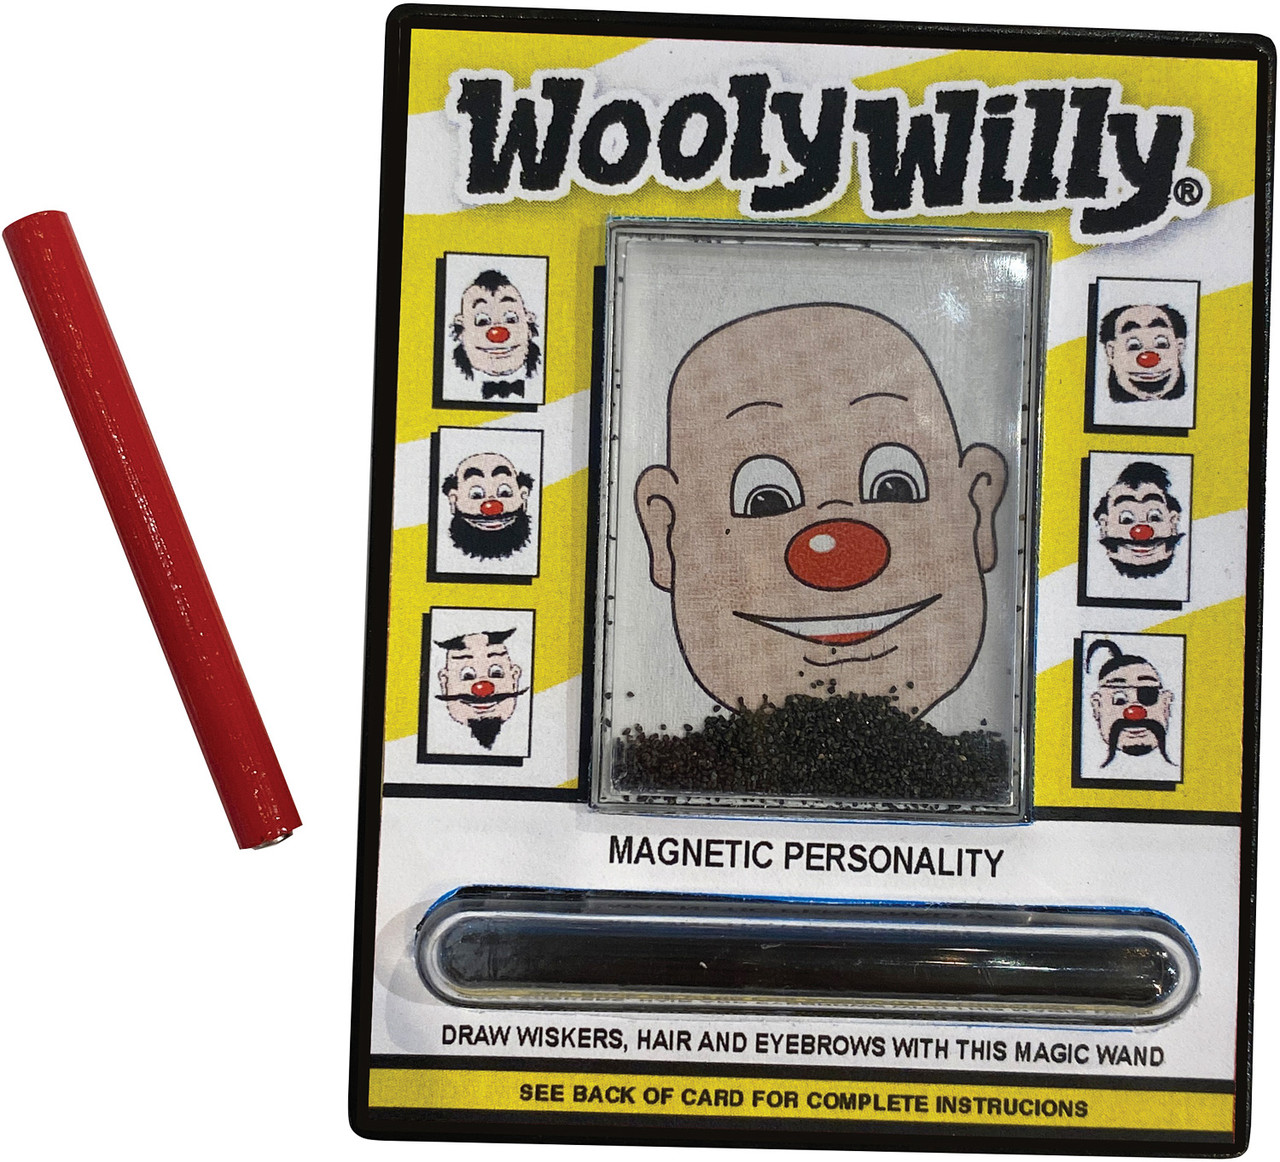 World's Smallest Wooly Willy 4